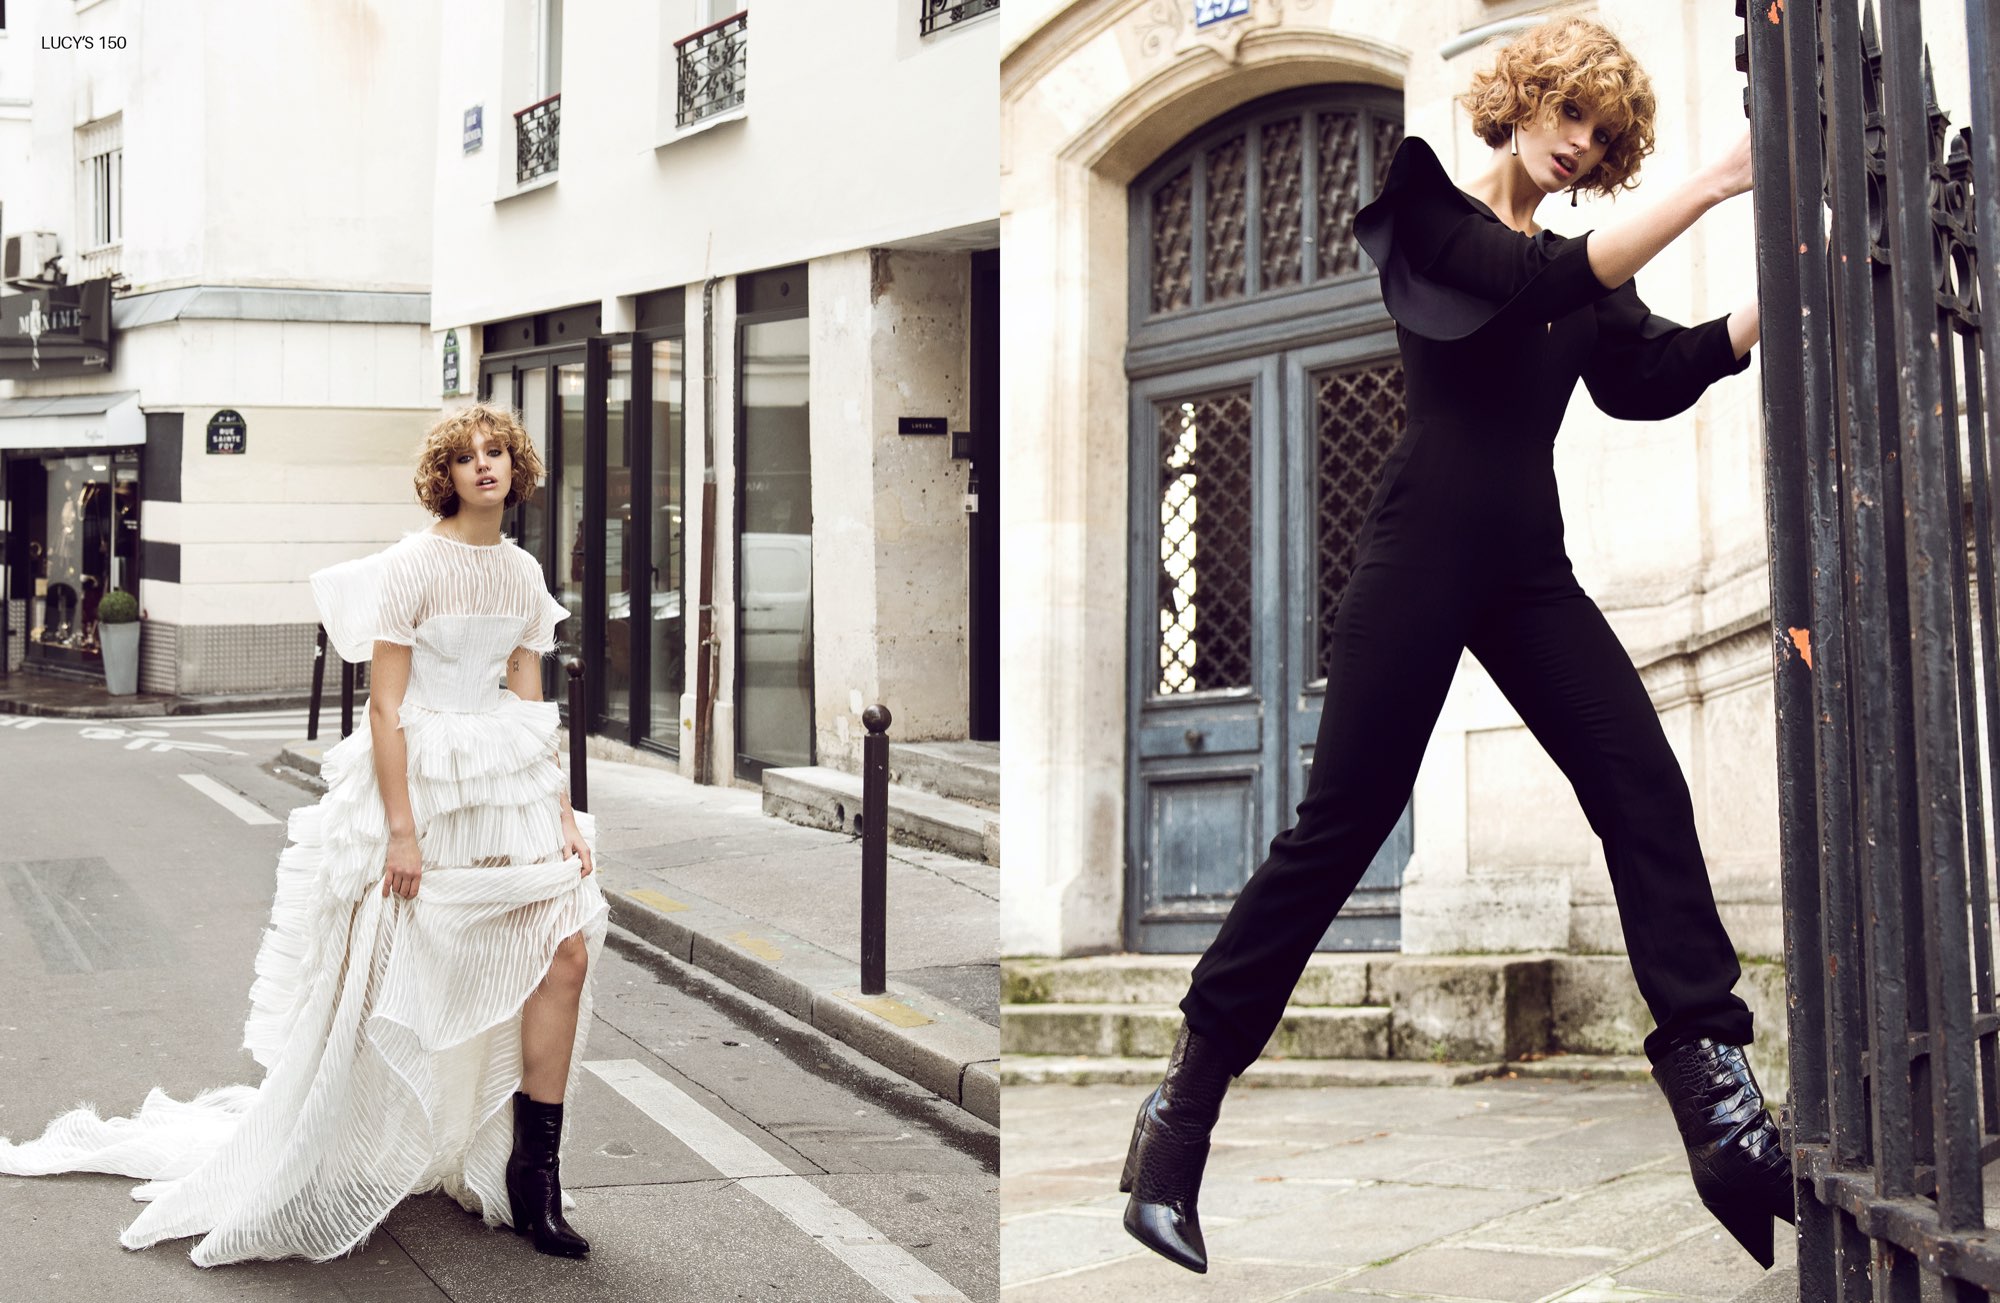 New editorial in Paris of Fabienne & Julia for Lucy’s Magazine